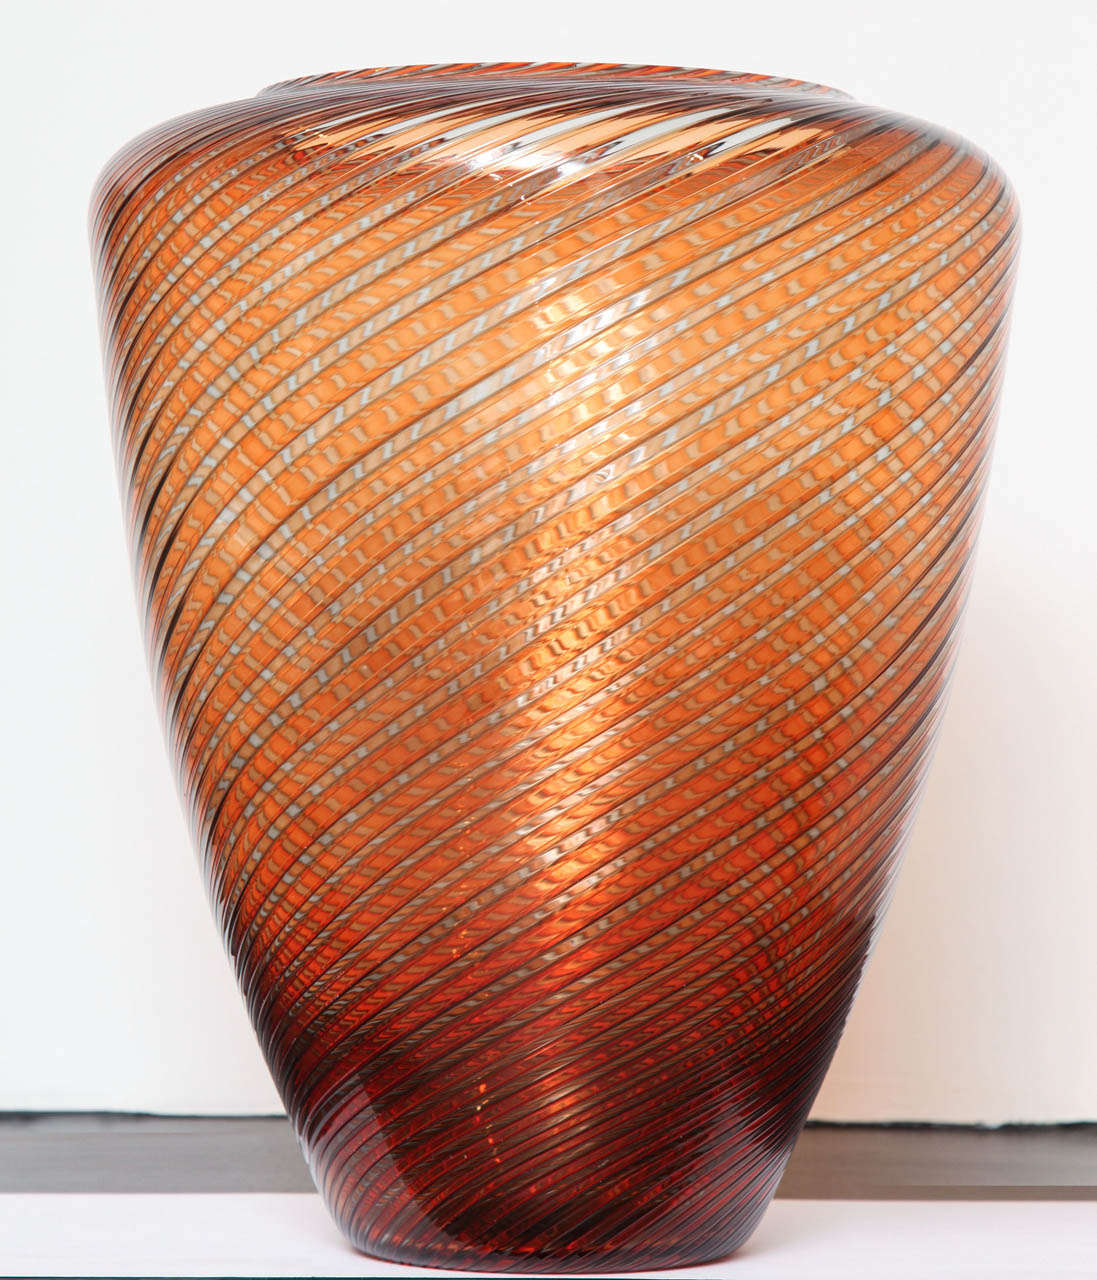 Signed Cenedese Murano Glass Vase. Pink-orange coloration in a swirl pattern.